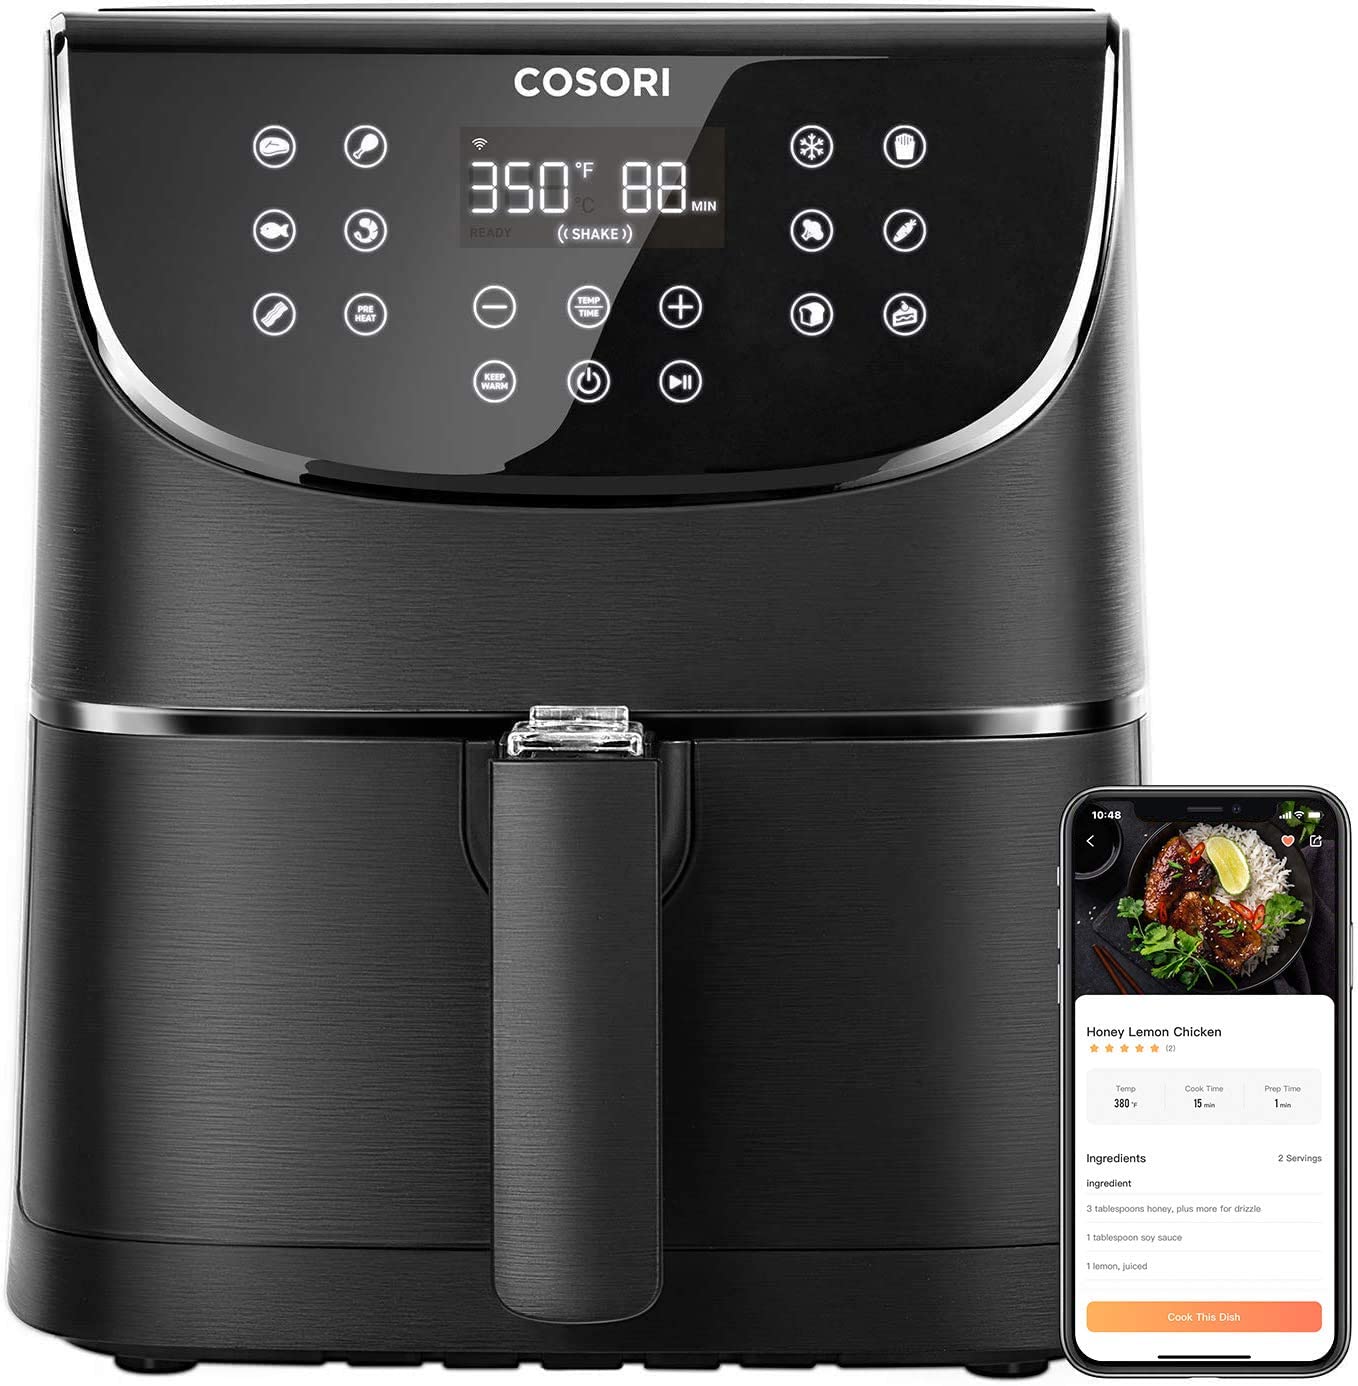 COSORI Smart WiFi Air Fryer with 13 Cooking Functions - $109.99 + FS with Prime